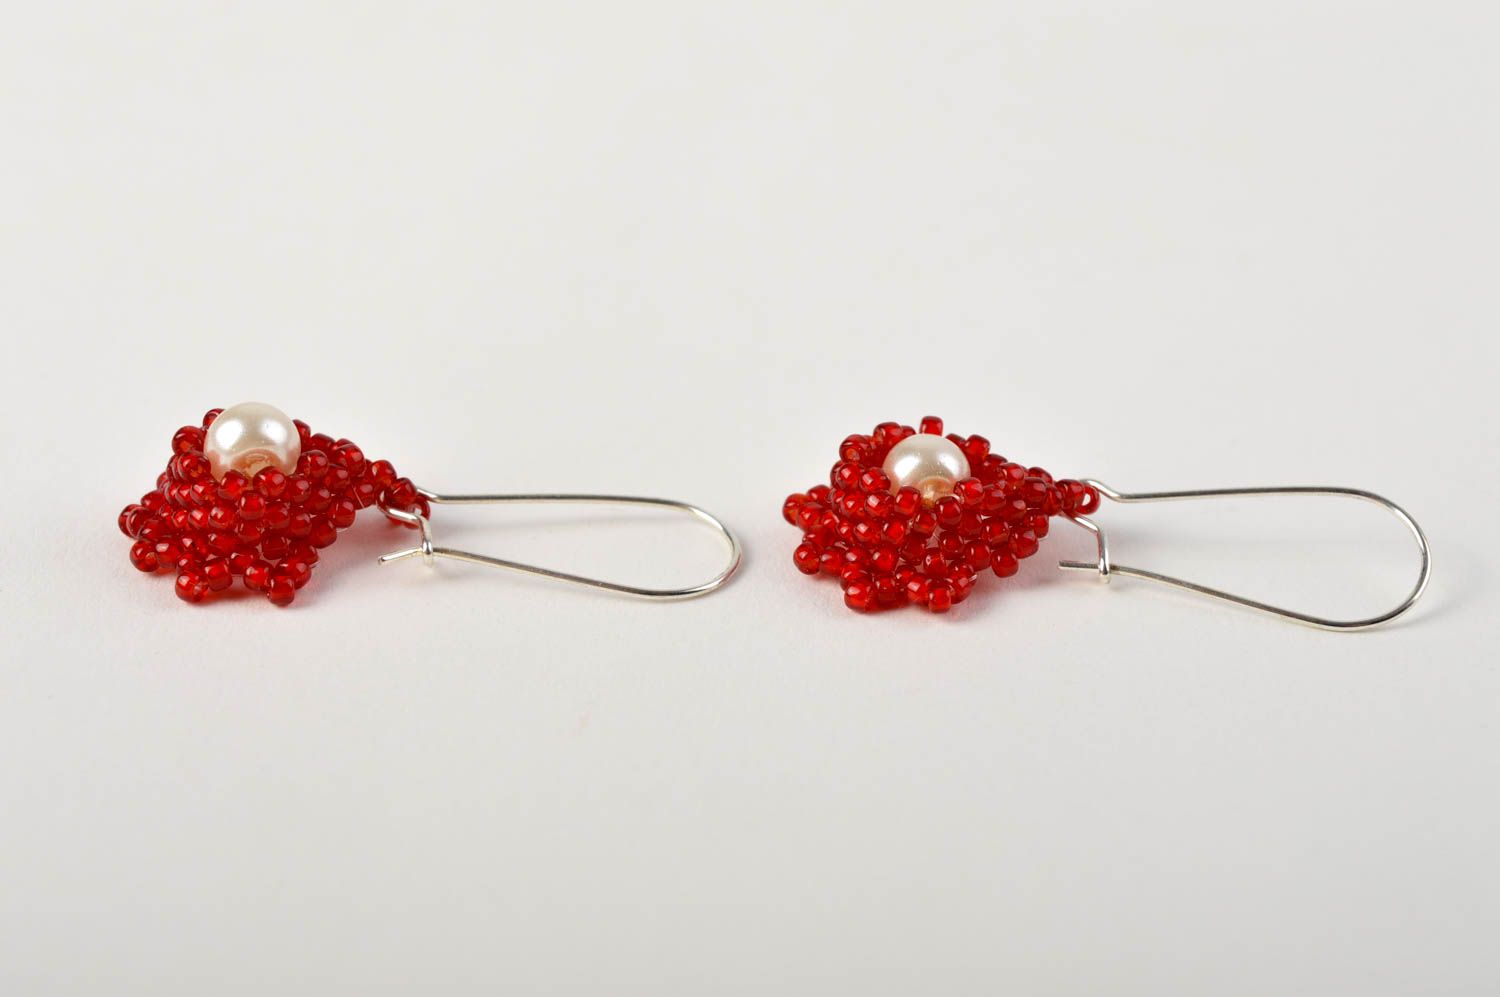 Handmade festive jewelry unusual cute accessory red earrings gift for her photo 4